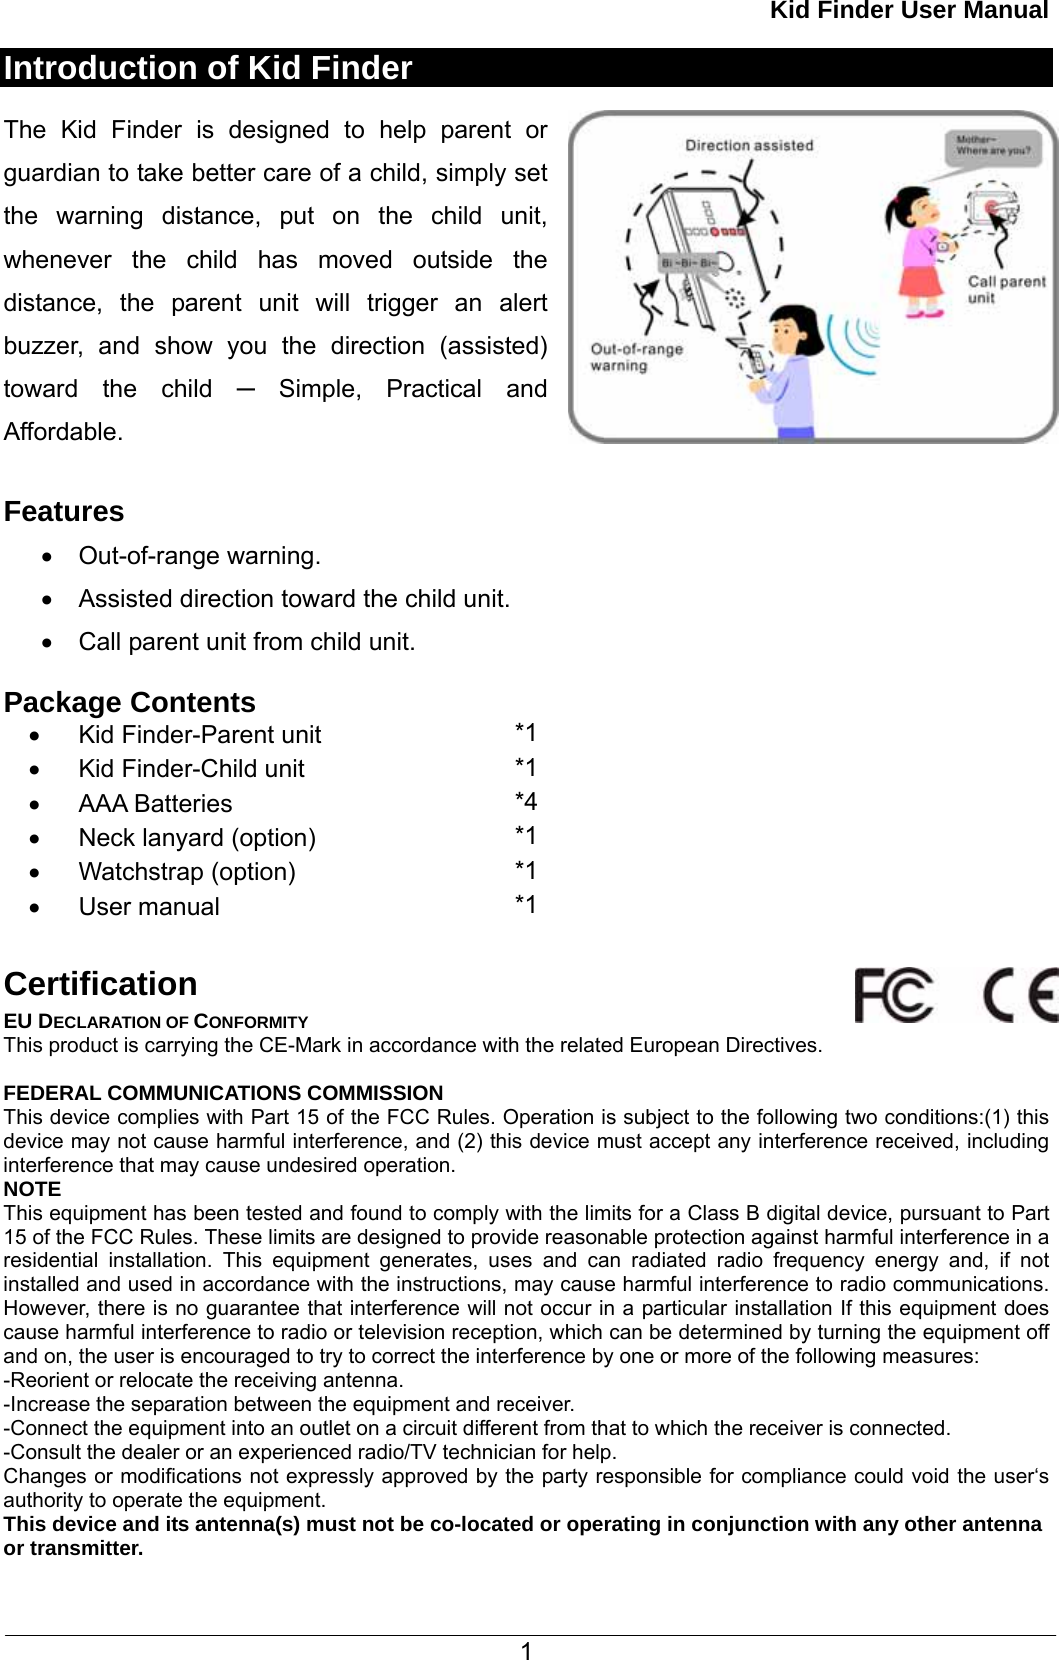 Kid Finder User Manual  1 Introduction of Kid Finder  The Kid Finder is designed to help parent or guardian to take better care of a child, simply set the warning distance, put on the child unit, whenever the child has moved outside the distance, the parent unit will trigger an alert buzzer, and show you the direction (assisted) toward the child ─ Simple, Practical and Affordable.  Features •  Out-of-range warning. •  Assisted direction toward the child unit. •  Call parent unit from child unit.  Package Contents •  Kid Finder-Parent unit        *1 •  Kid Finder-Child unit      *1 •  AAA Batteries      *4 •  Neck lanyard (option)  *1 •  Watchstrap (option)  *1 •  User manual    *1  Certification EU DECLARATION OF CONFORMITY This product is carrying the CE-Mark in accordance with the related European Directives.    FEDERAL COMMUNICATIONS COMMISSION This device complies with Part 15 of the FCC Rules. Operation is subject to the following two conditions:(1) this device may not cause harmful interference, and (2) this device must accept any interference received, including interference that may cause undesired operation. NOTE This equipment has been tested and found to comply with the limits for a Class B digital device, pursuant to Part 15 of the FCC Rules. These limits are designed to provide reasonable protection against harmful interference in a residential installation. This equipment generates, uses and can radiated radio frequency energy and, if not installed and used in accordance with the instructions, may cause harmful interference to radio communications. However, there is no guarantee that interference will not occur in a particular installation If this equipment does cause harmful interference to radio or television reception, which can be determined by turning the equipment off and on, the user is encouraged to try to correct the interference by one or more of the following measures: -Reorient or relocate the receiving antenna. -Increase the separation between the equipment and receiver. -Connect the equipment into an outlet on a circuit different from that to which the receiver is connected. -Consult the dealer or an experienced radio/TV technician for help. Changes or modifications not expressly approved by the party responsible for compliance could void the user‘s authority to operate the equipment. This device and its antenna(s) must not be co-located or operating in conjunction with any other antenna or transmitter.  